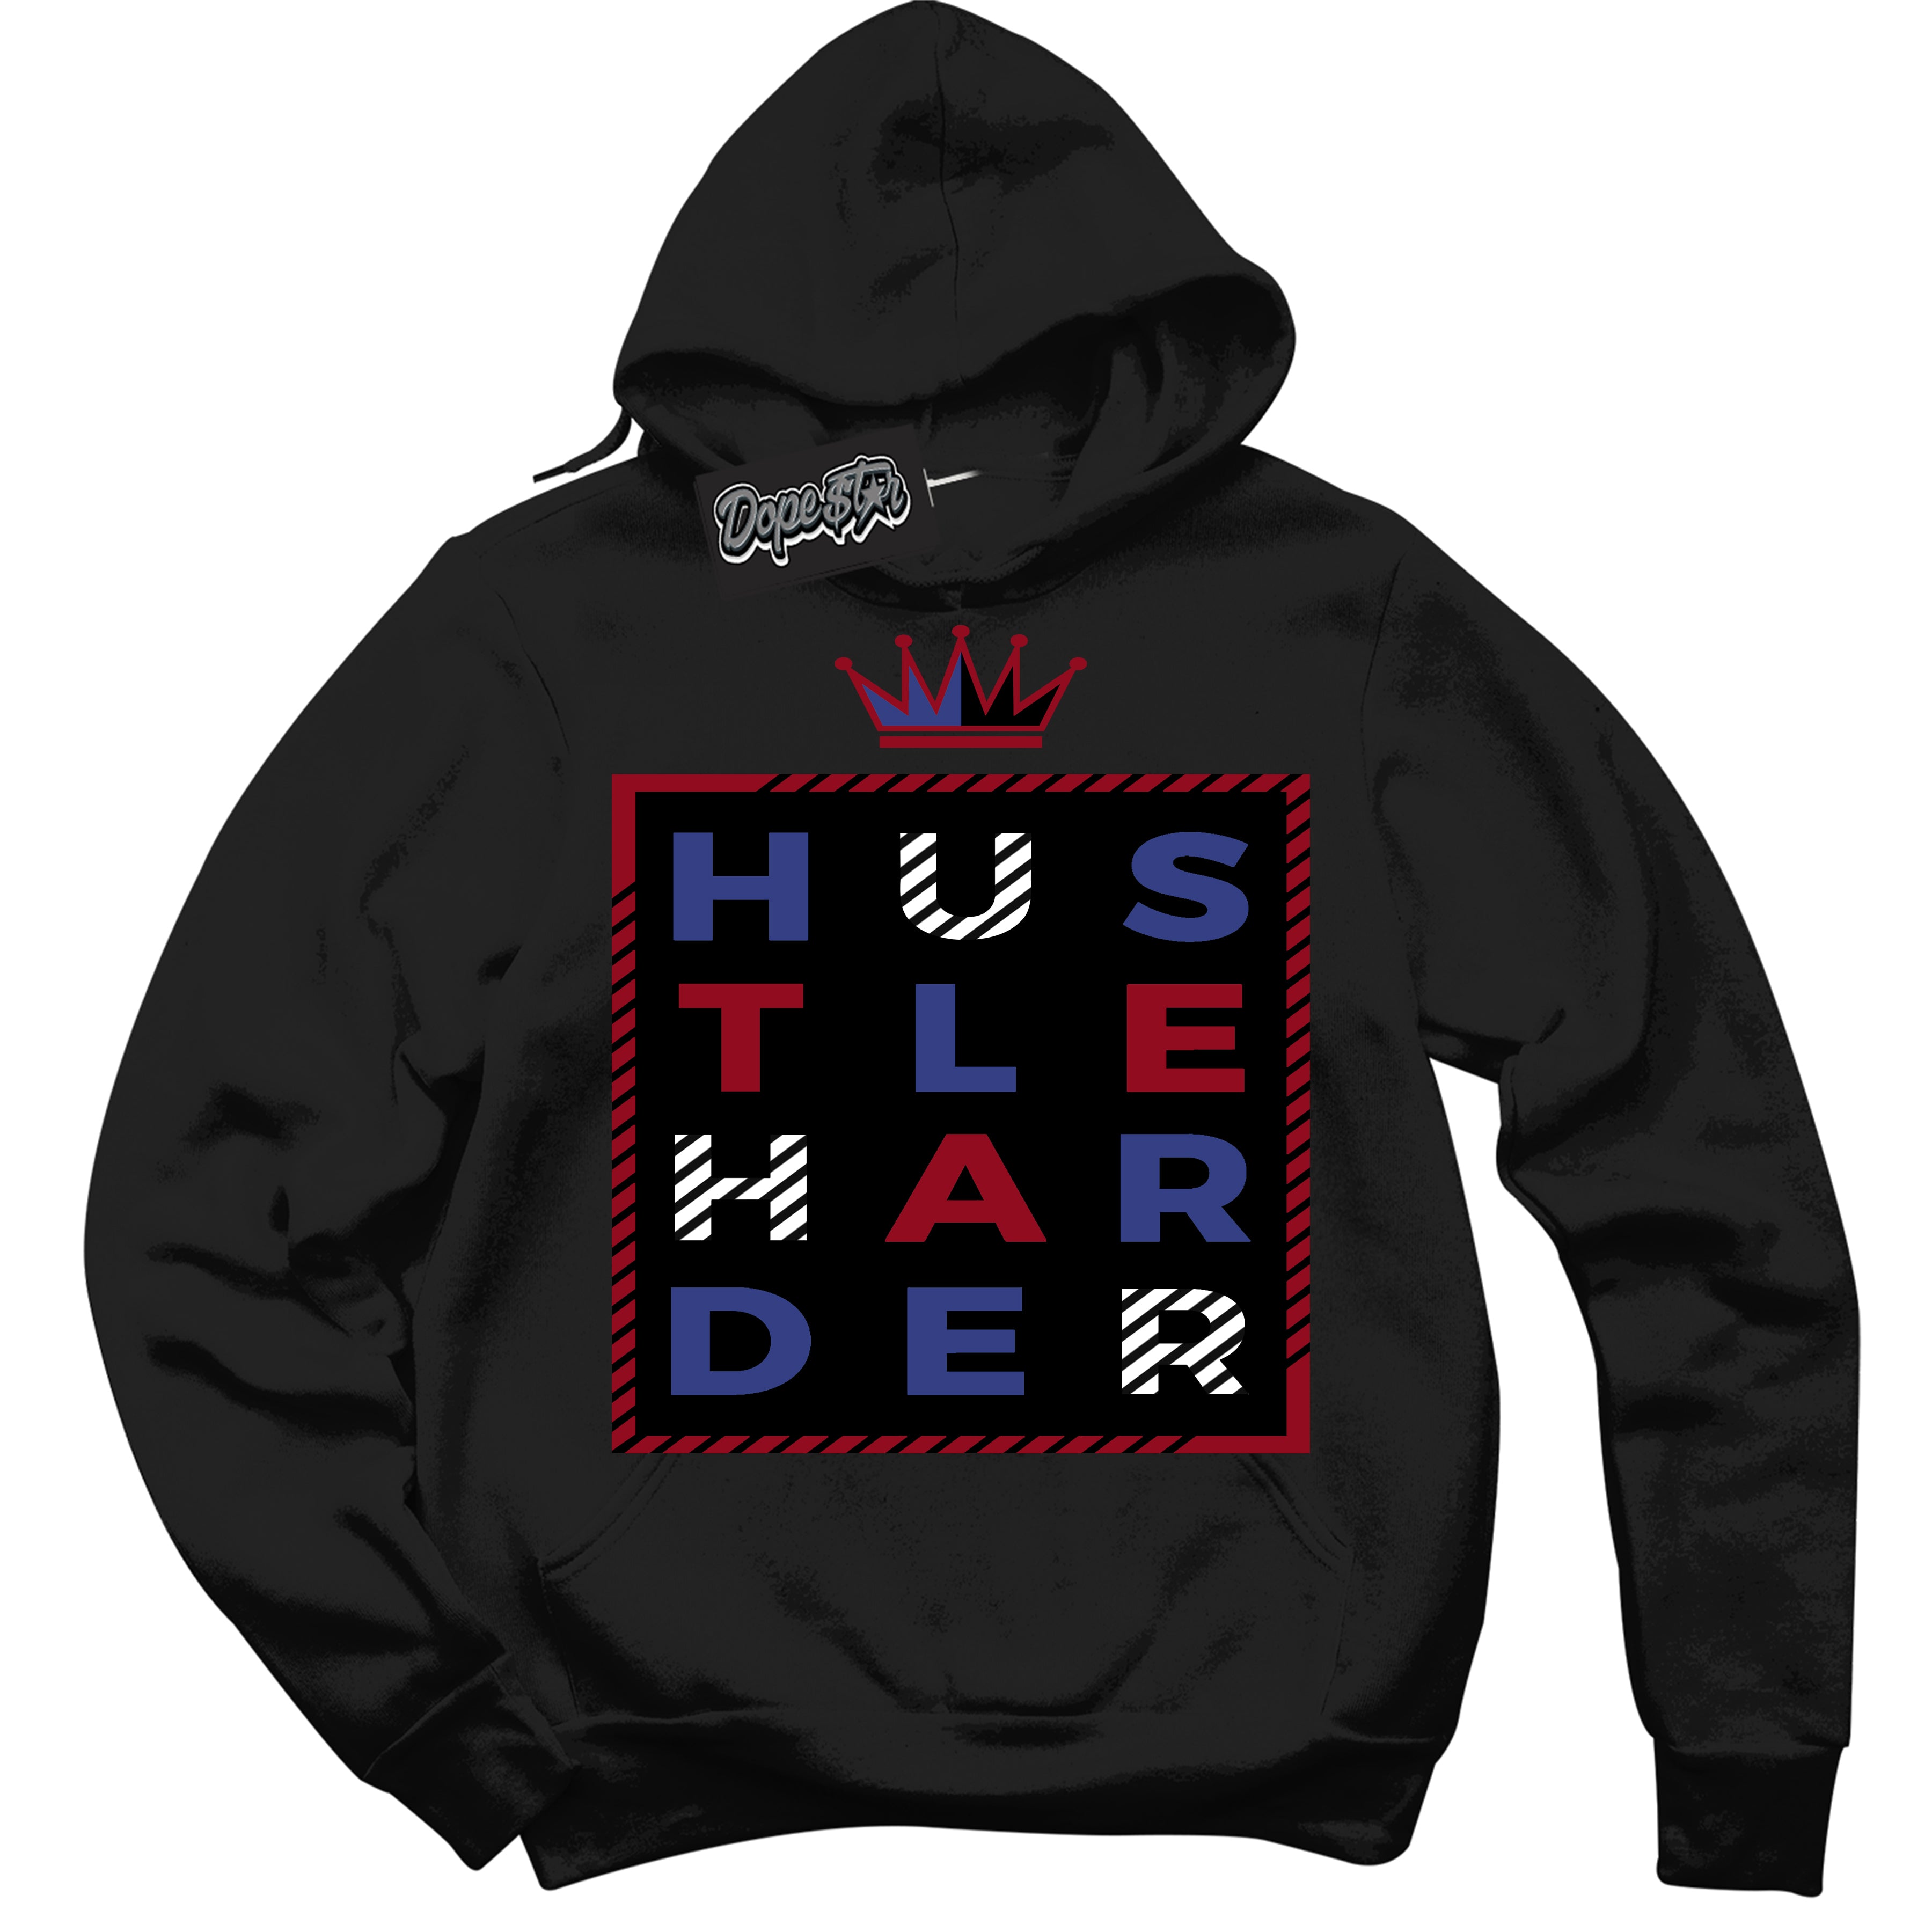 Cool Black Hoodie with “ Hustle Harder ”  design that Perfectly Matches Playoffs 8s Sneakers.